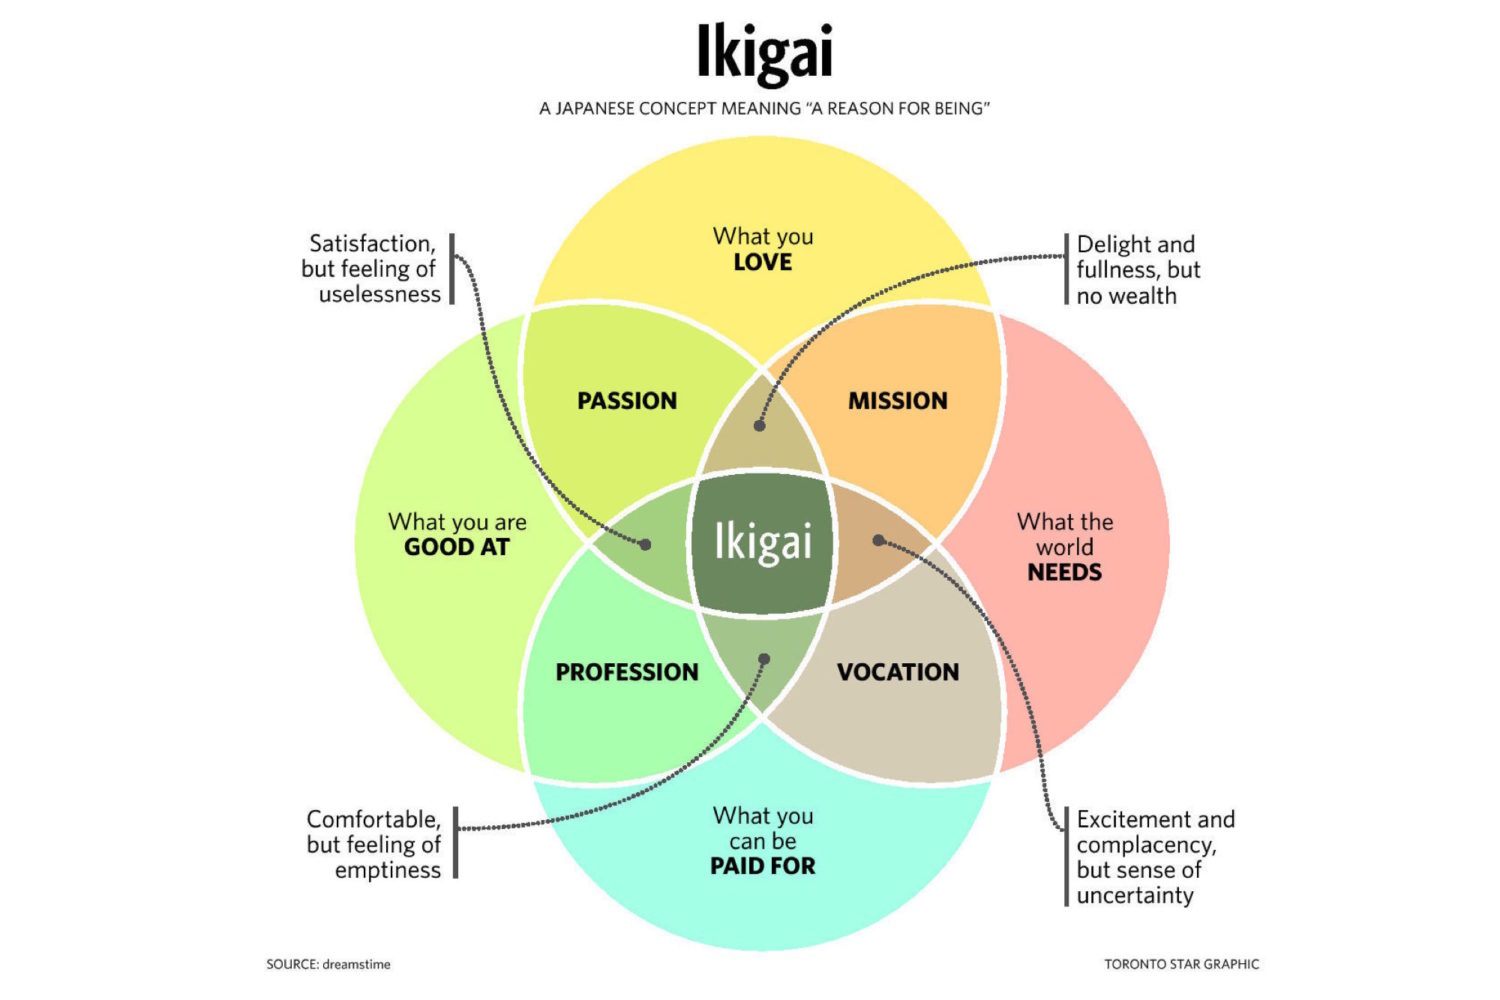 The meaning of “ikigai”, Japanese